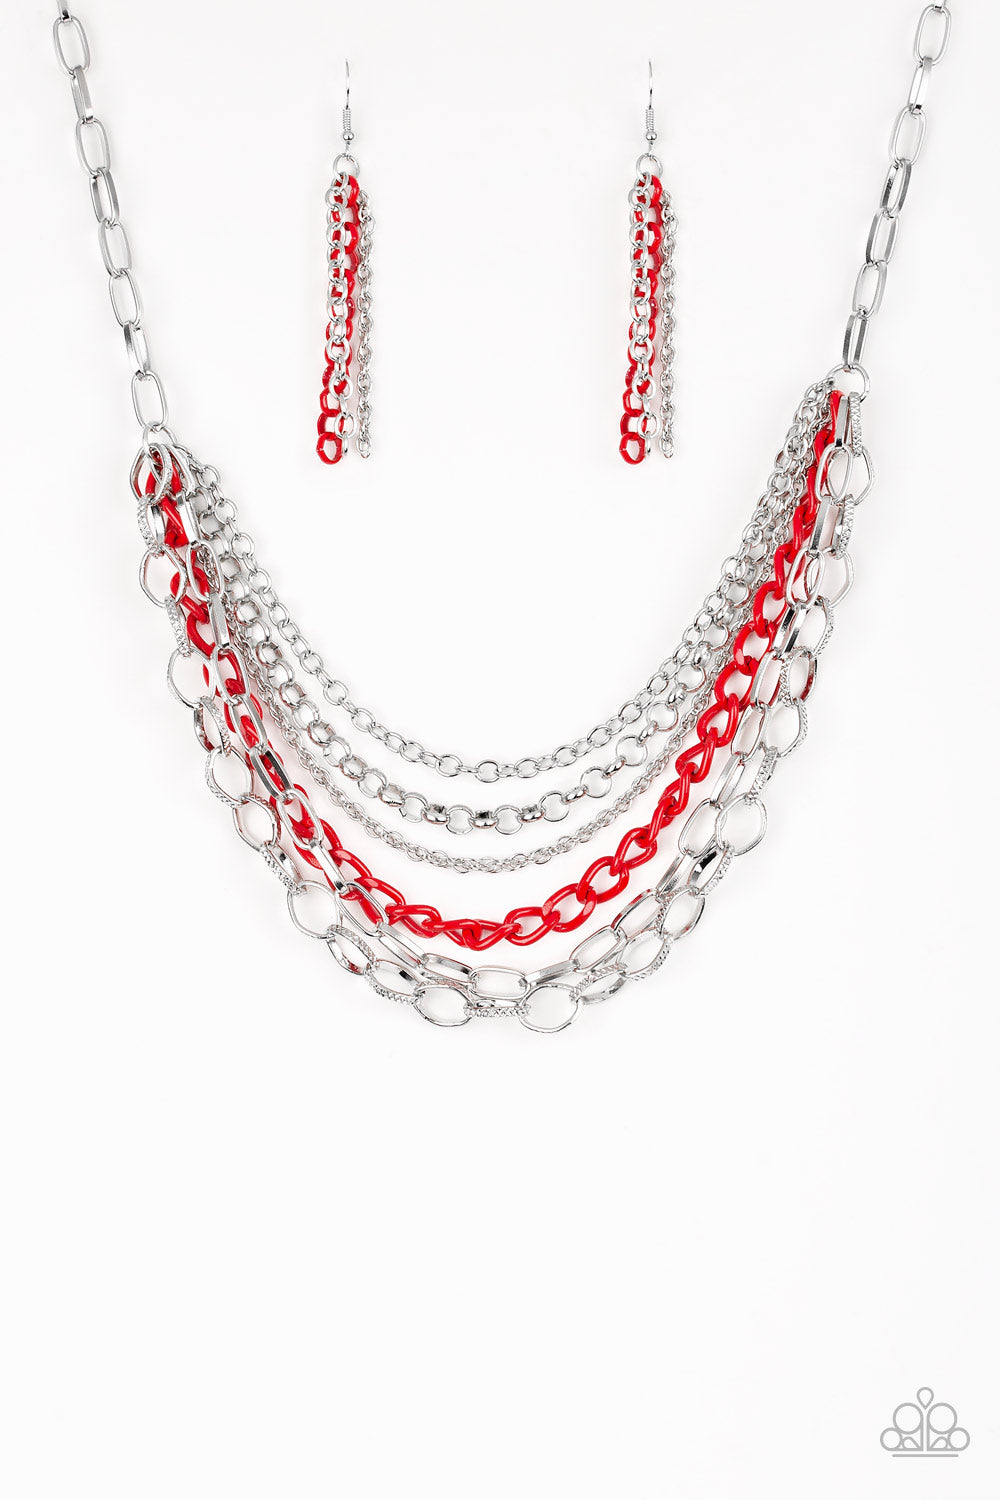 COLOR BOMB - RED AND SILVER MULTI CHAIN INDUSTRIAL NECKLACE